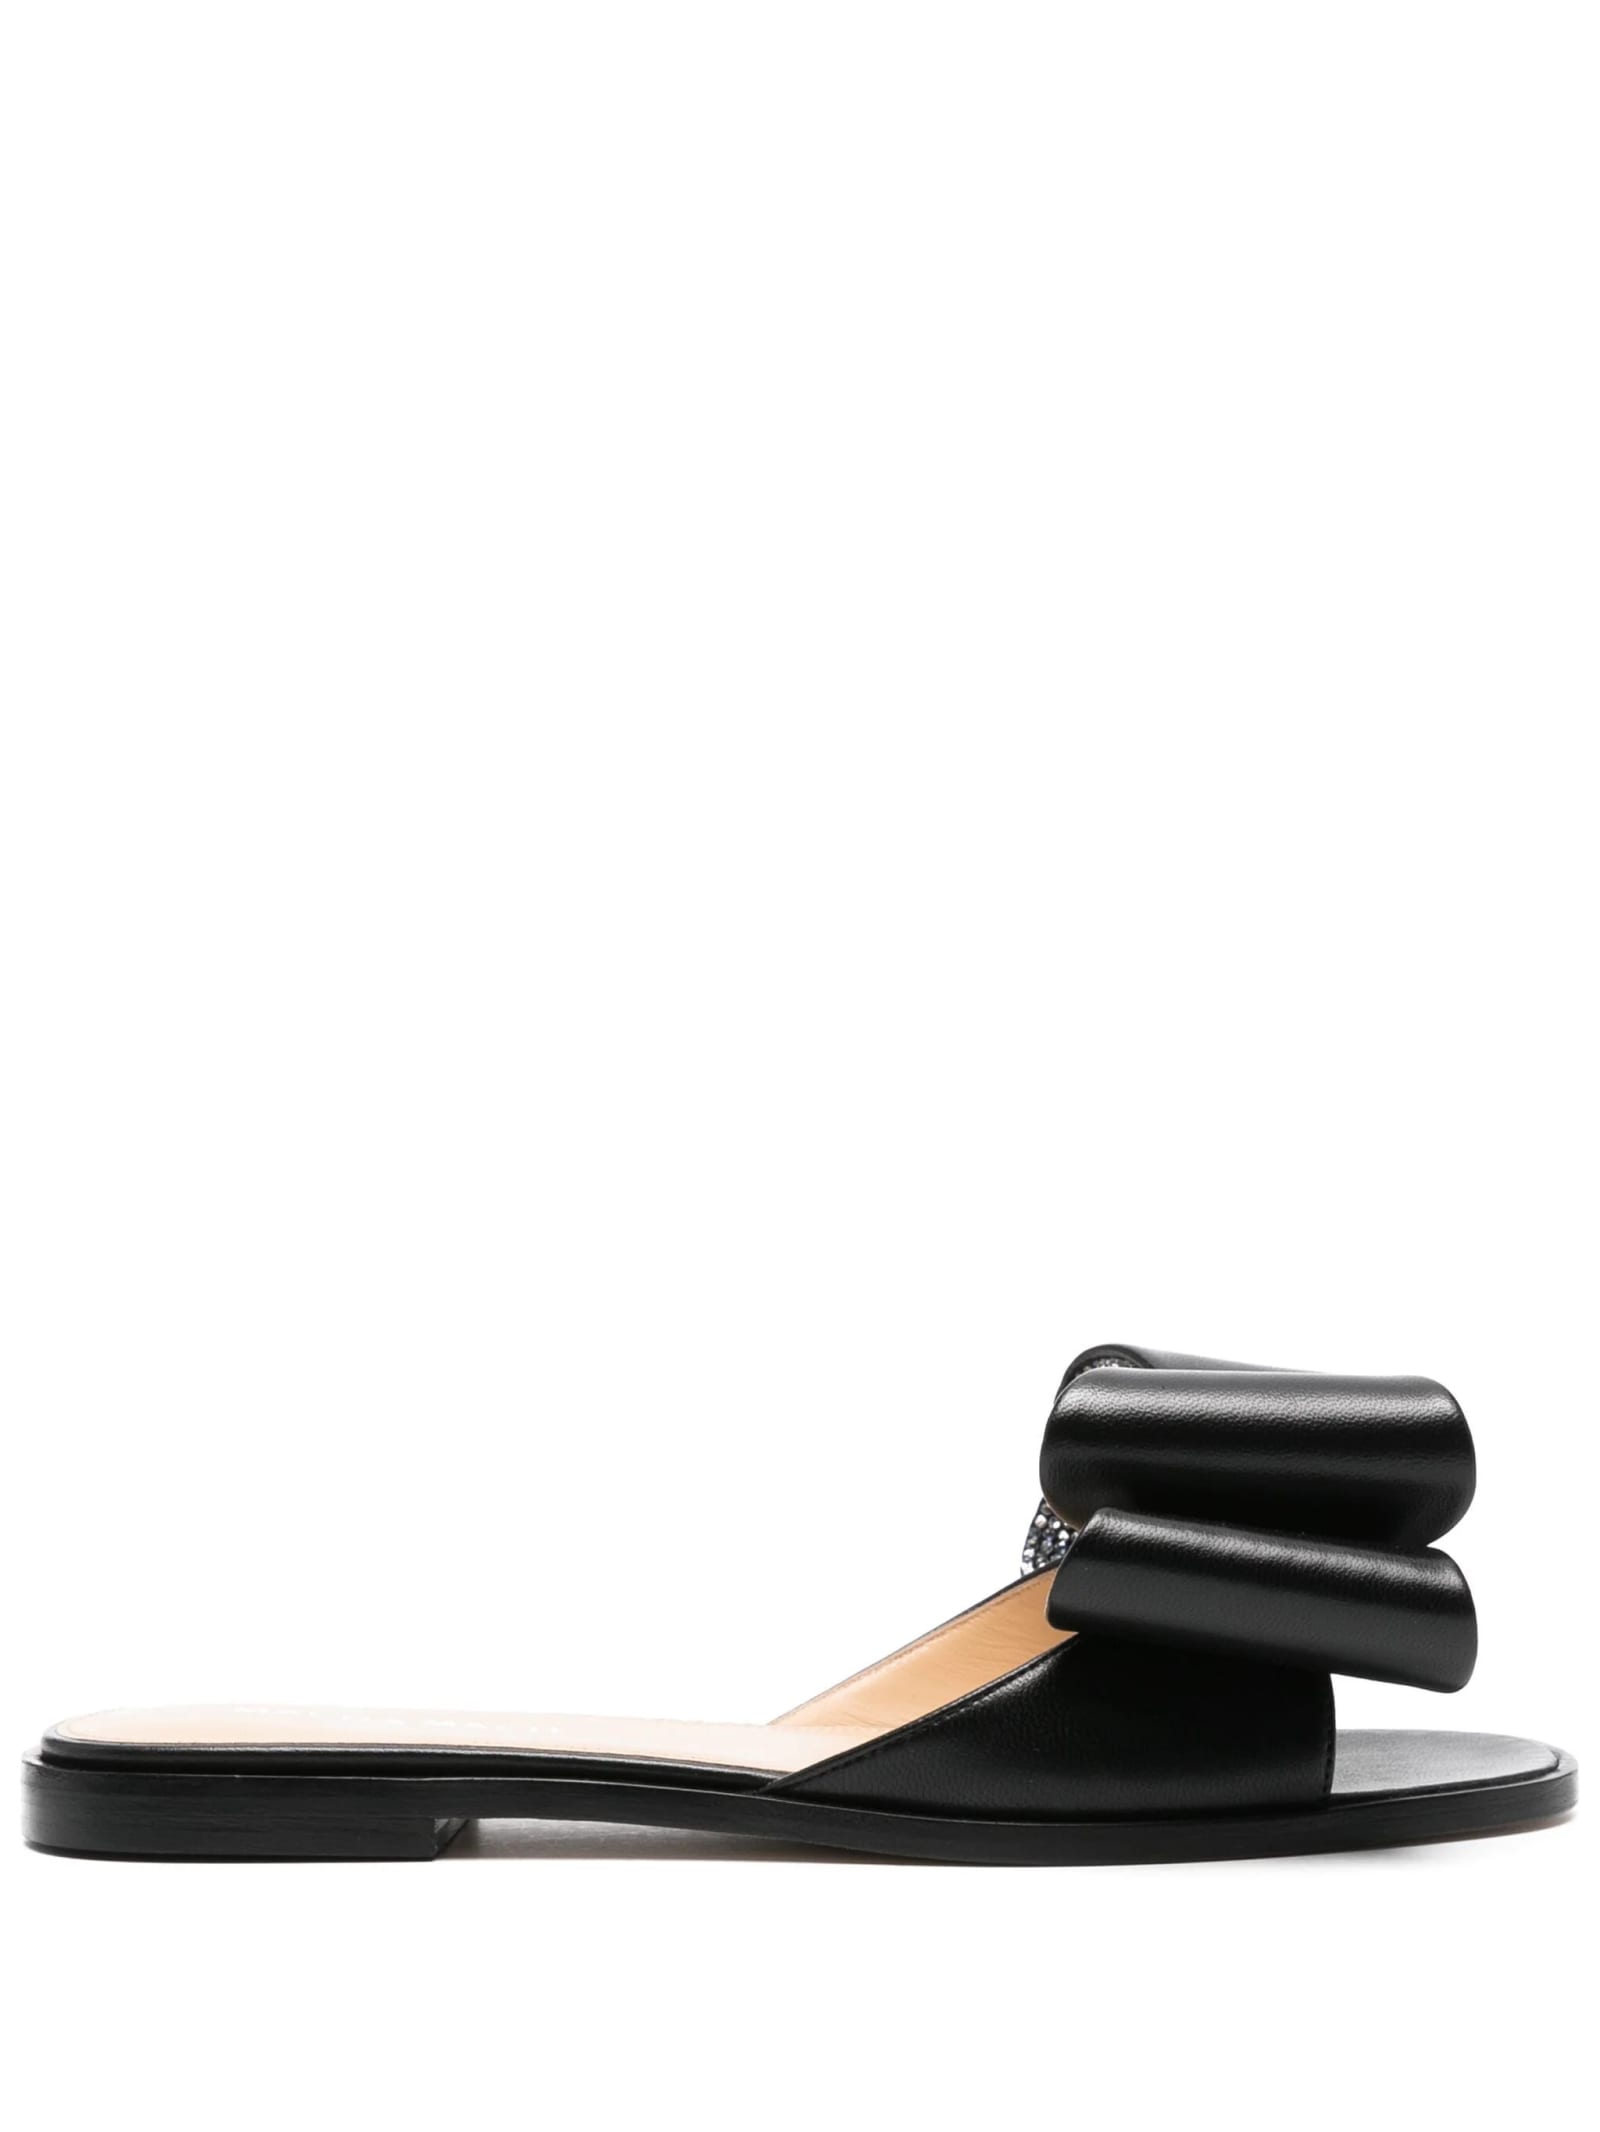 Flat Sandals With Bow In Black Nappa